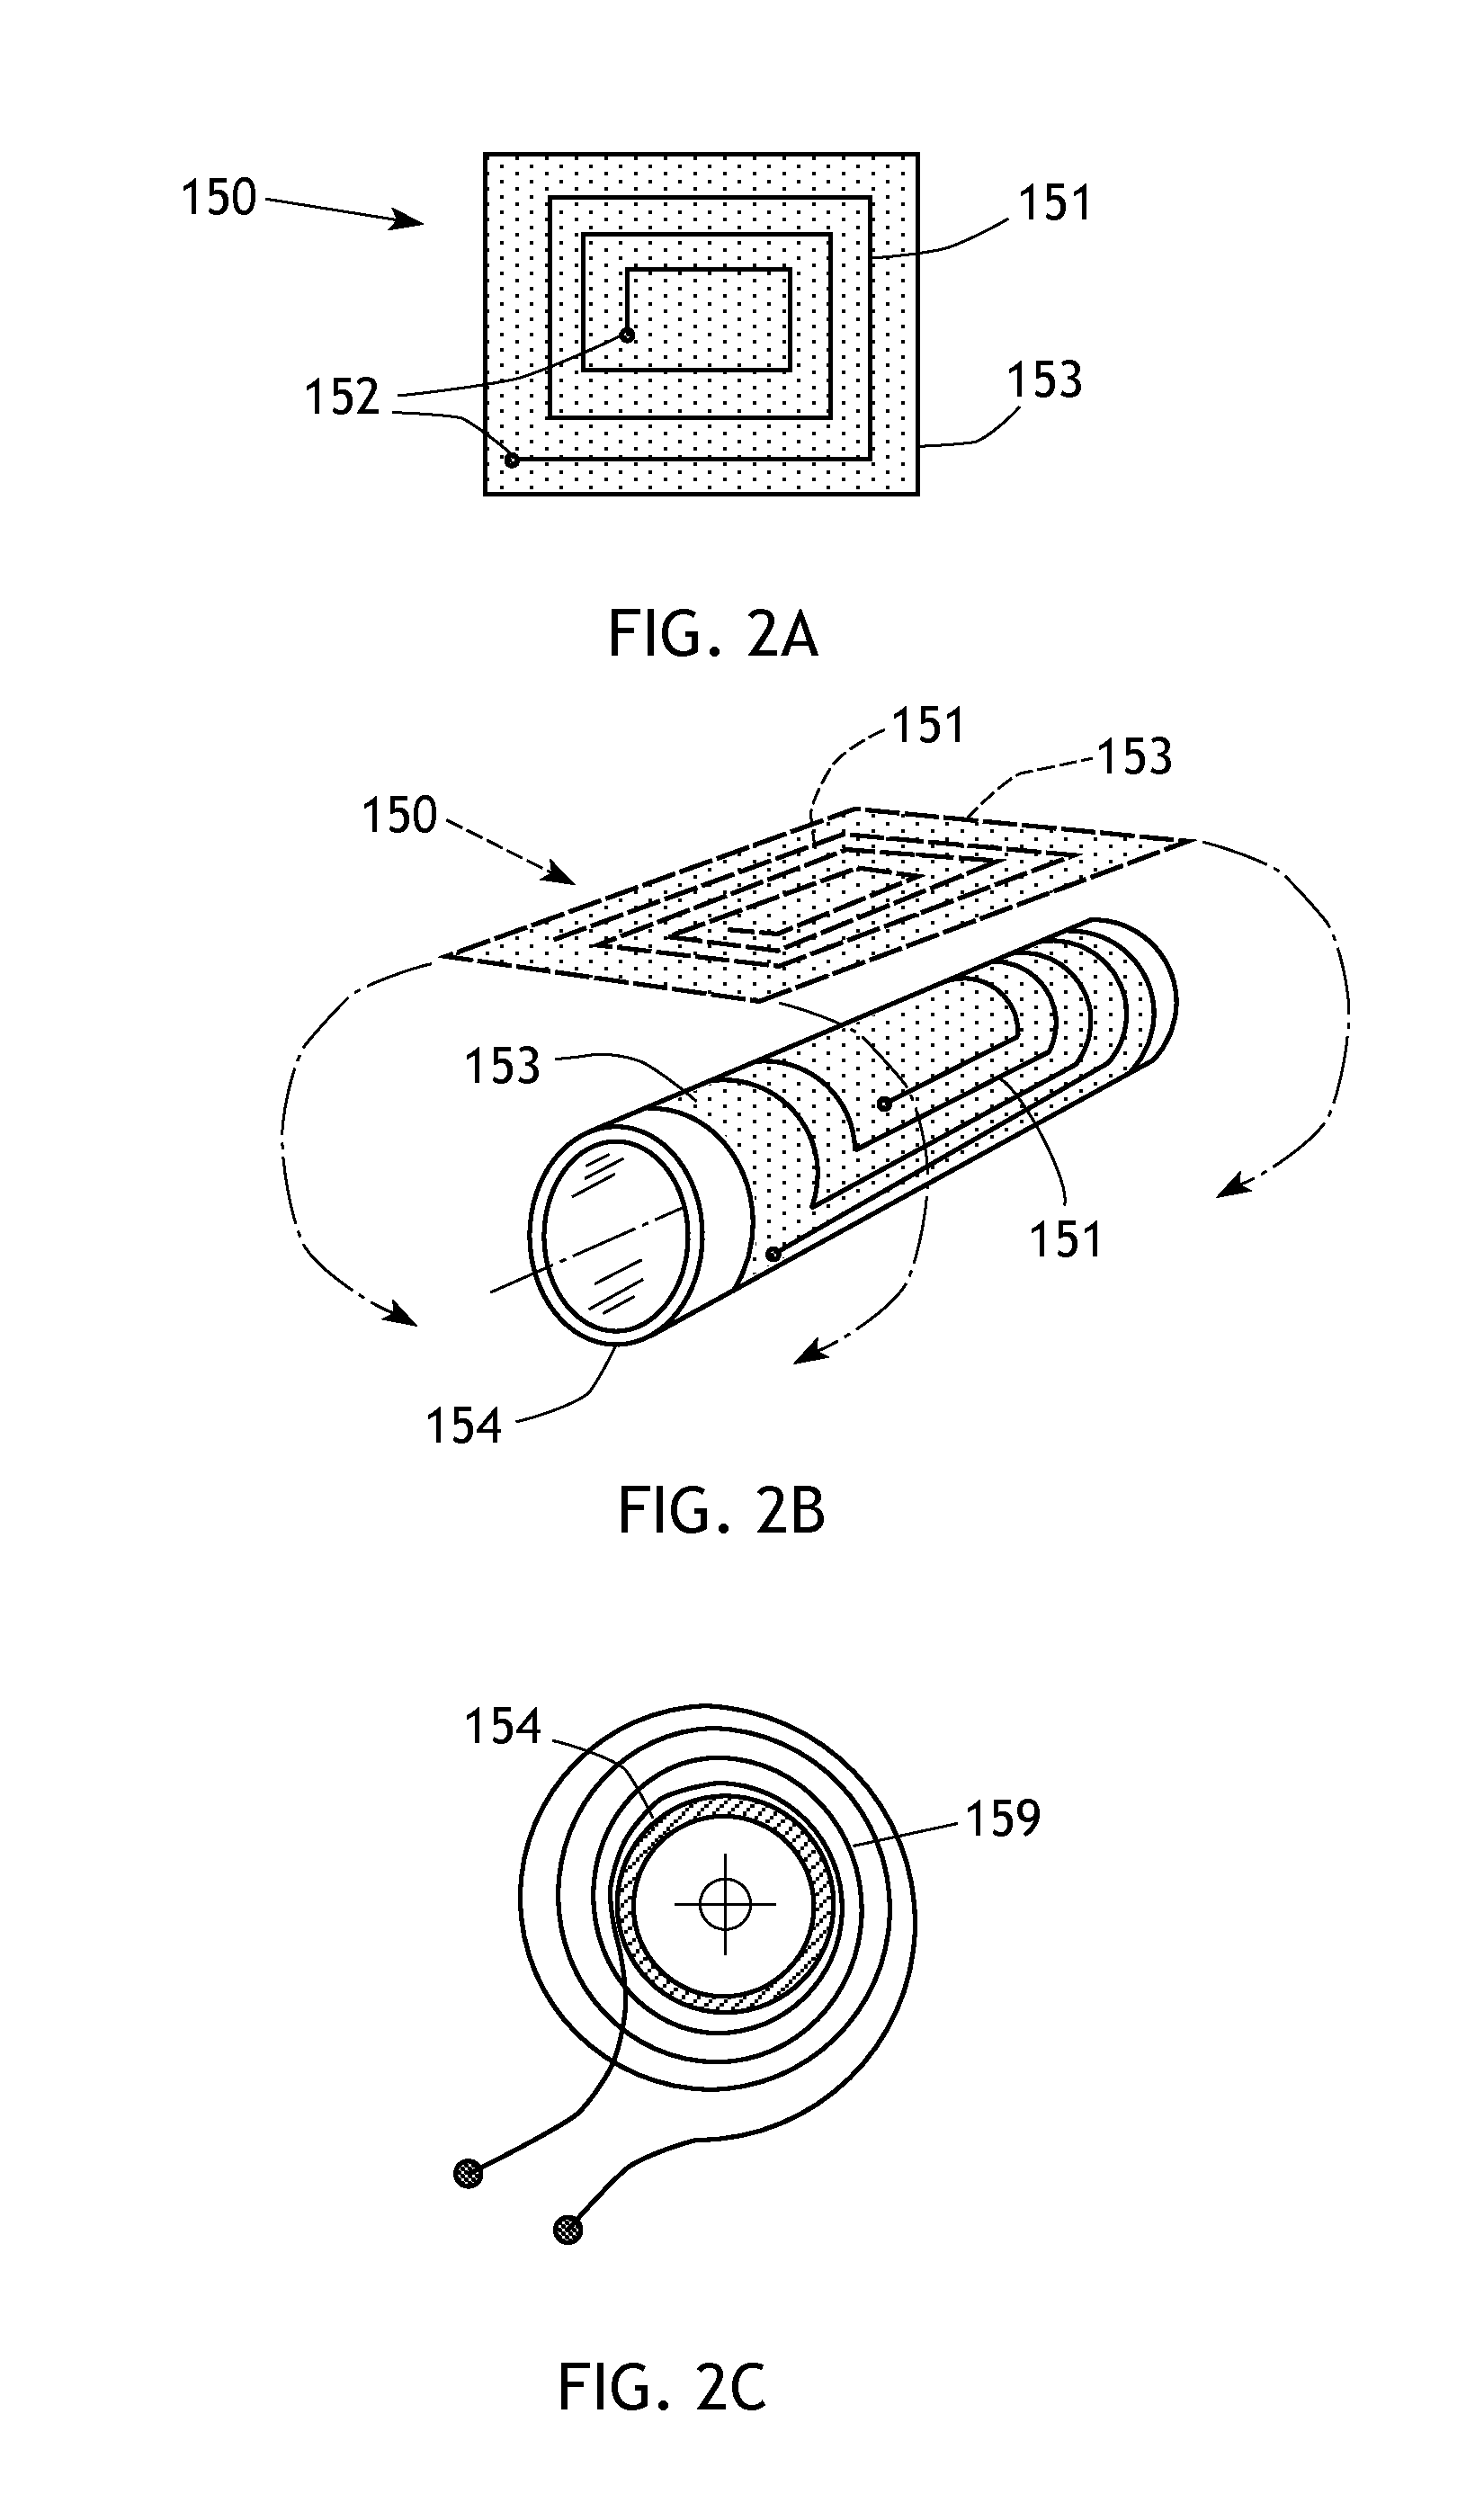 Method and Apparatus for Magnetic Response Imaging